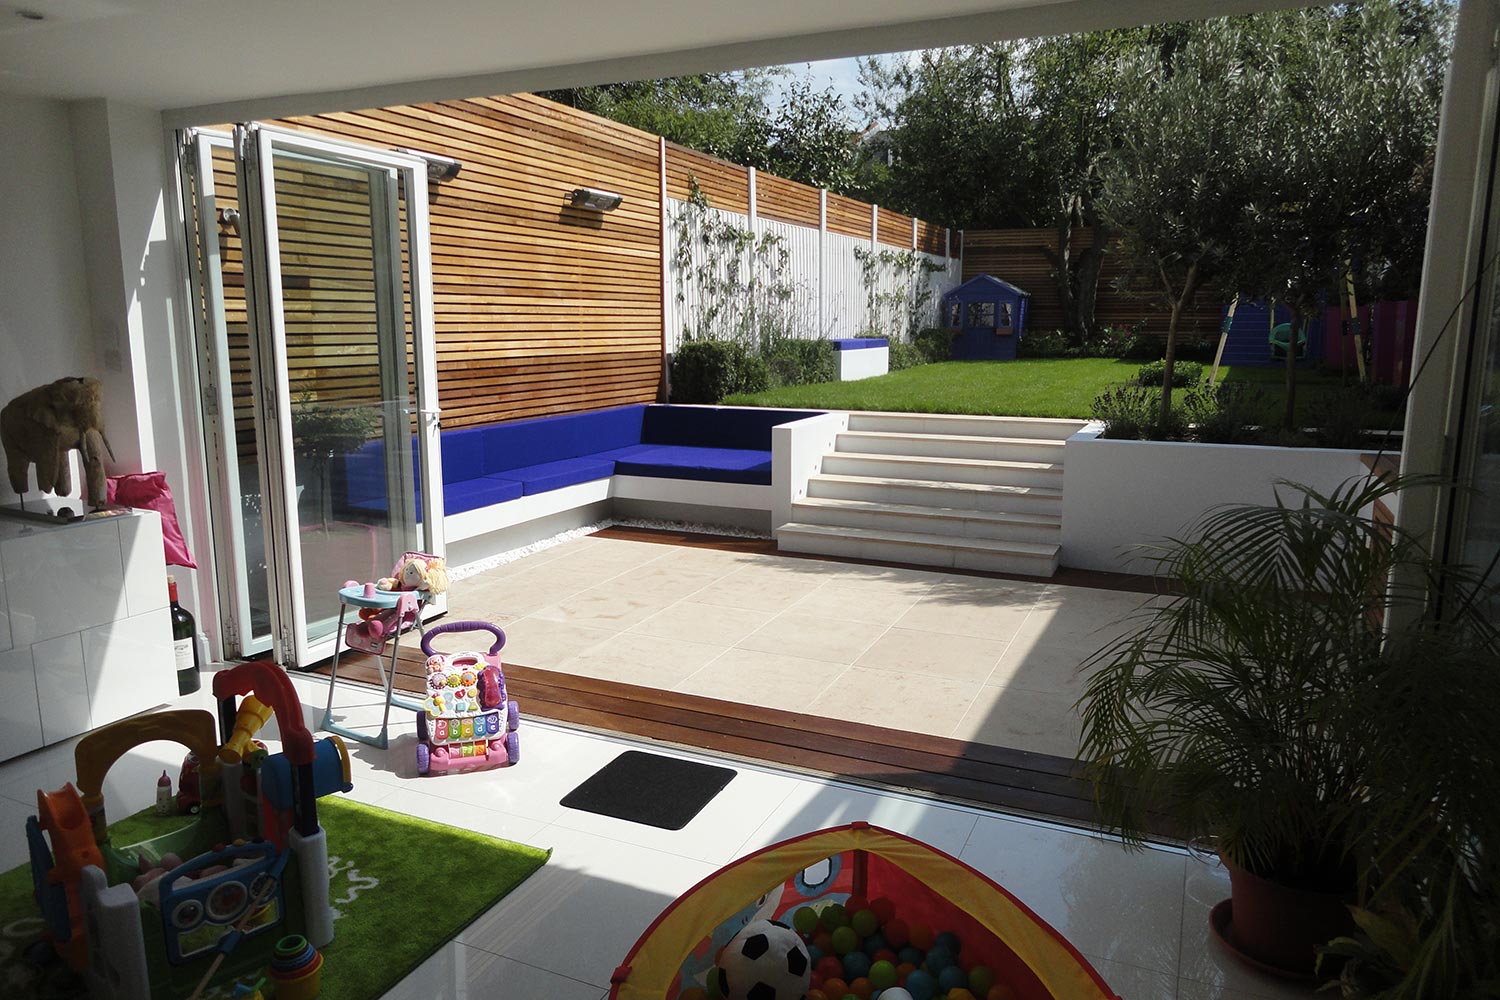   Wandsworth   Bright Garden for Young Family 